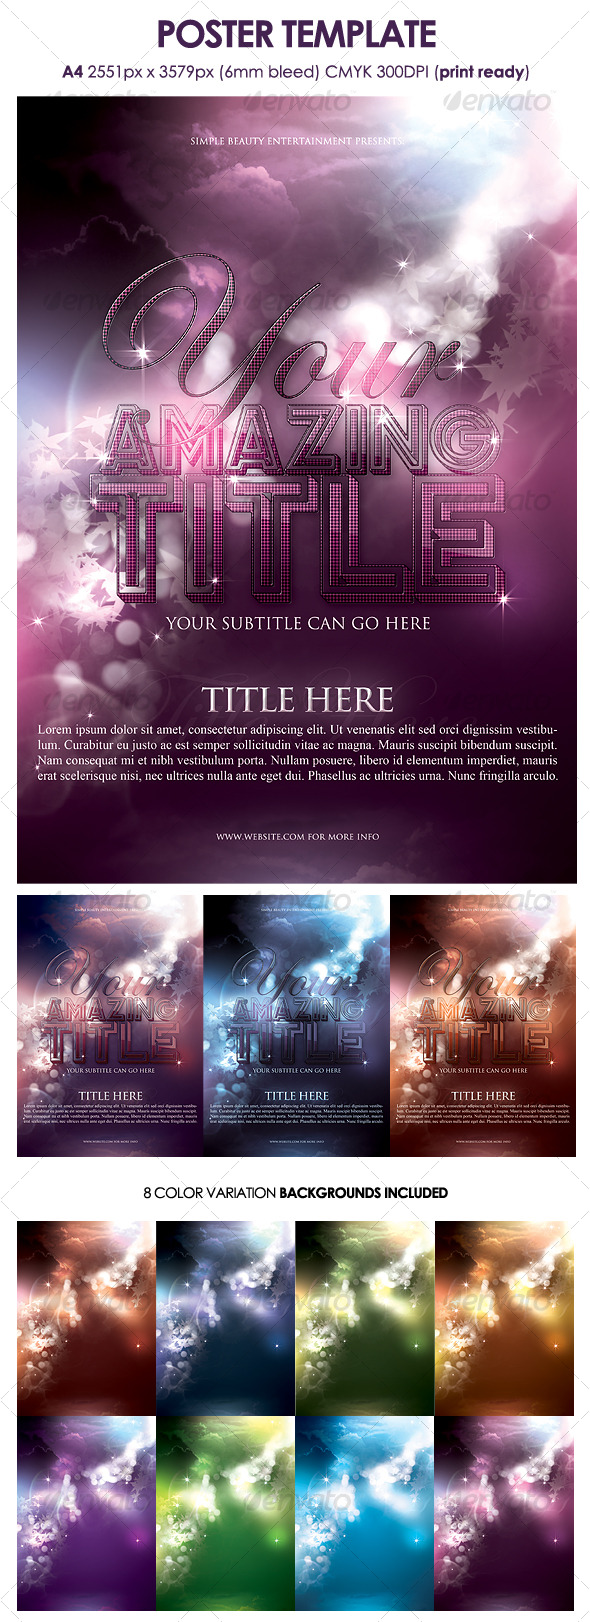 Project X Flyer Graphics Designs Templates From Graphicriver